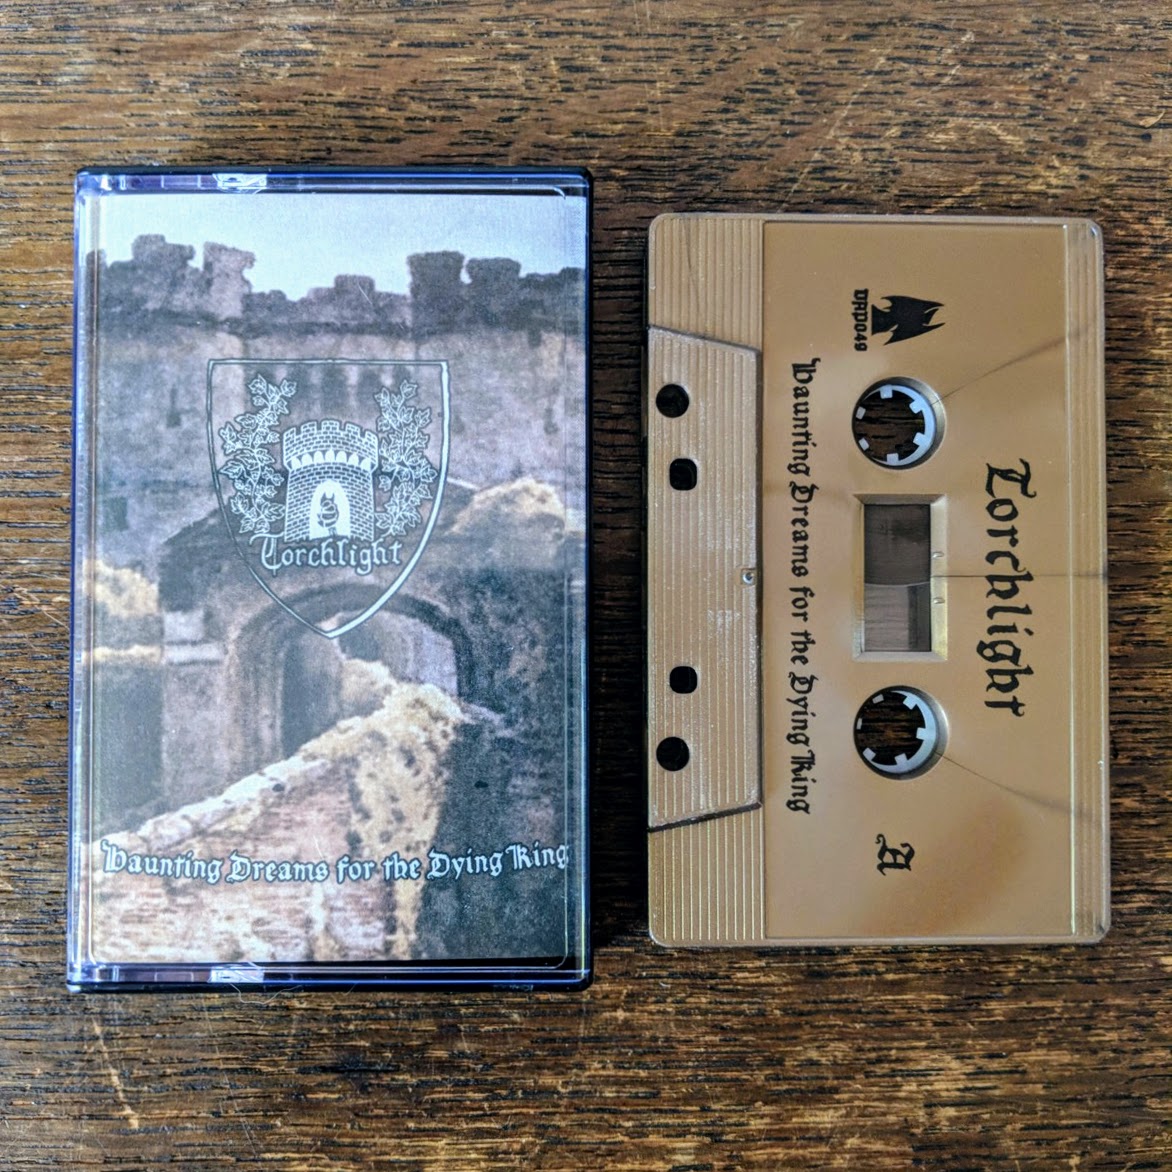 [SOLD OUT] TORCHLIGHT "Haunting Dreams for the Dying King" Cassette Tape